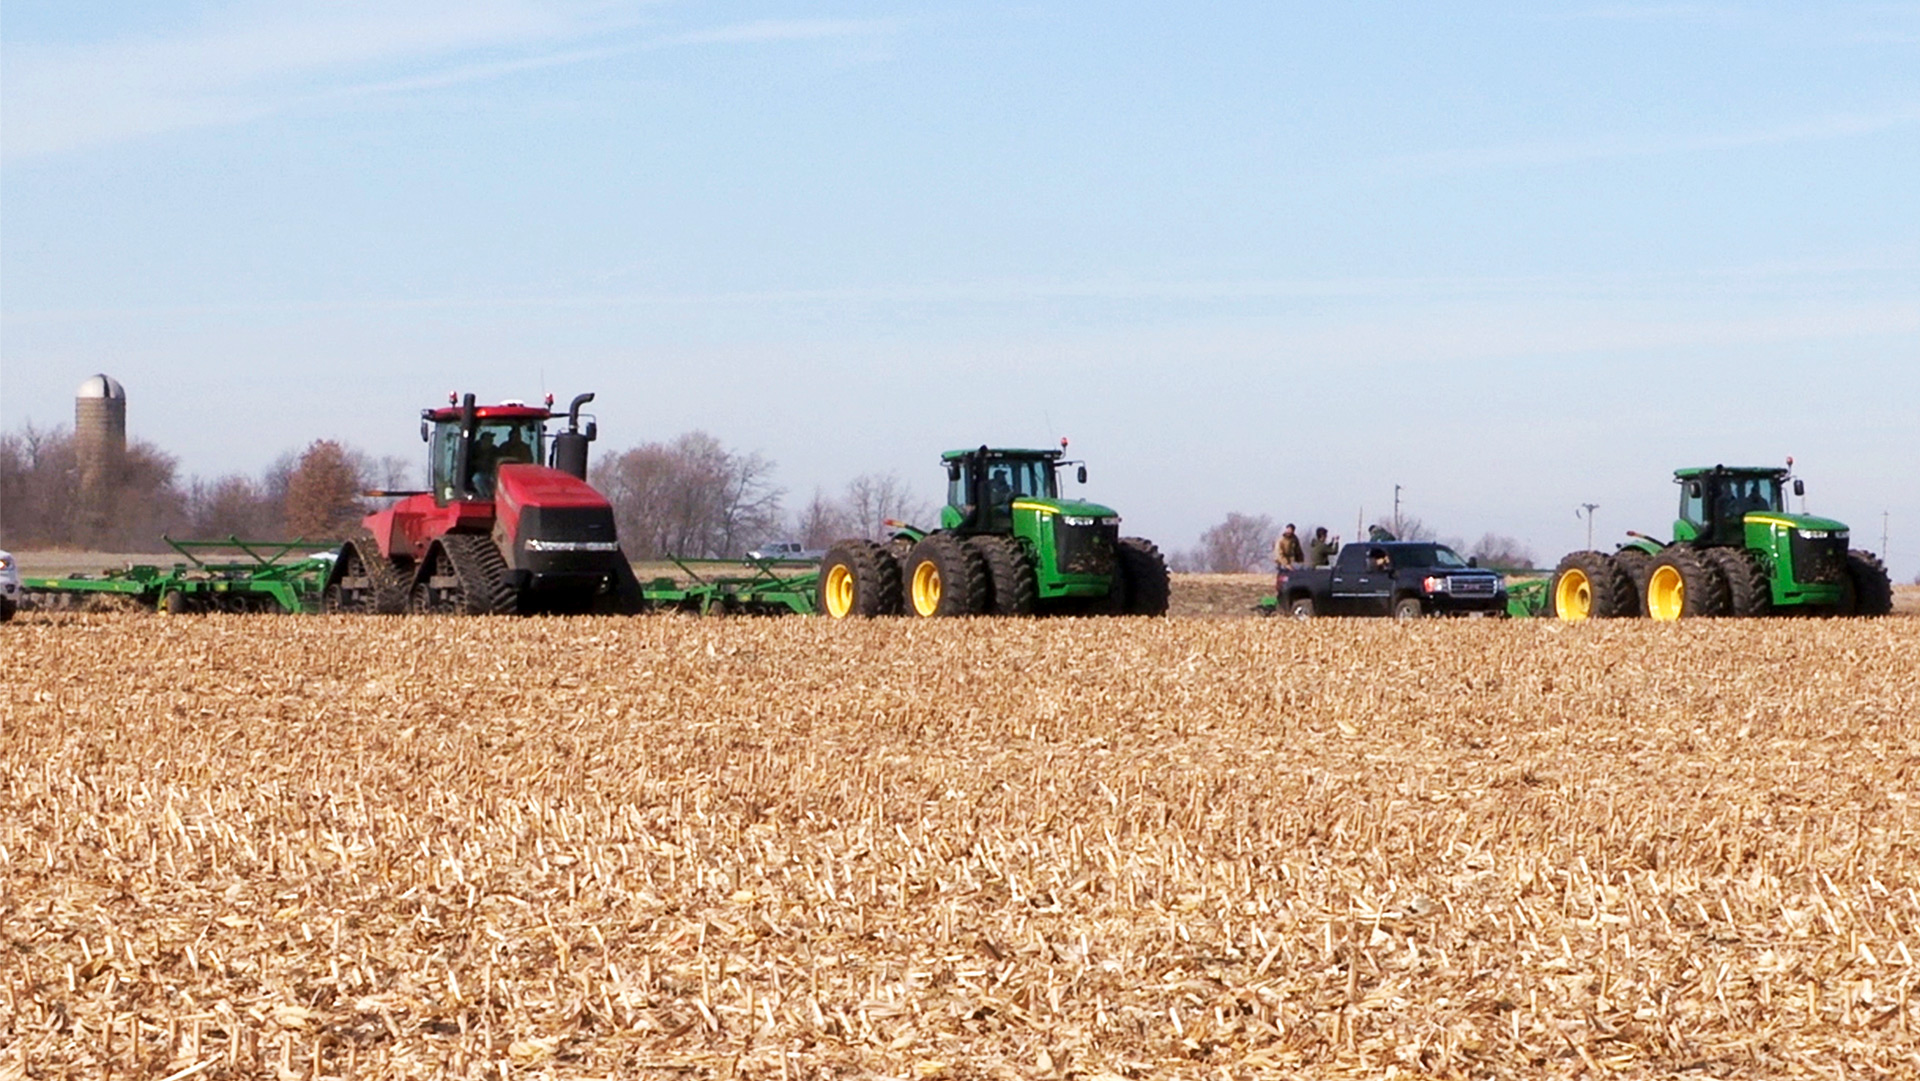 John Deere tractors in a field conducting a test to determine if tracks or tires perform better